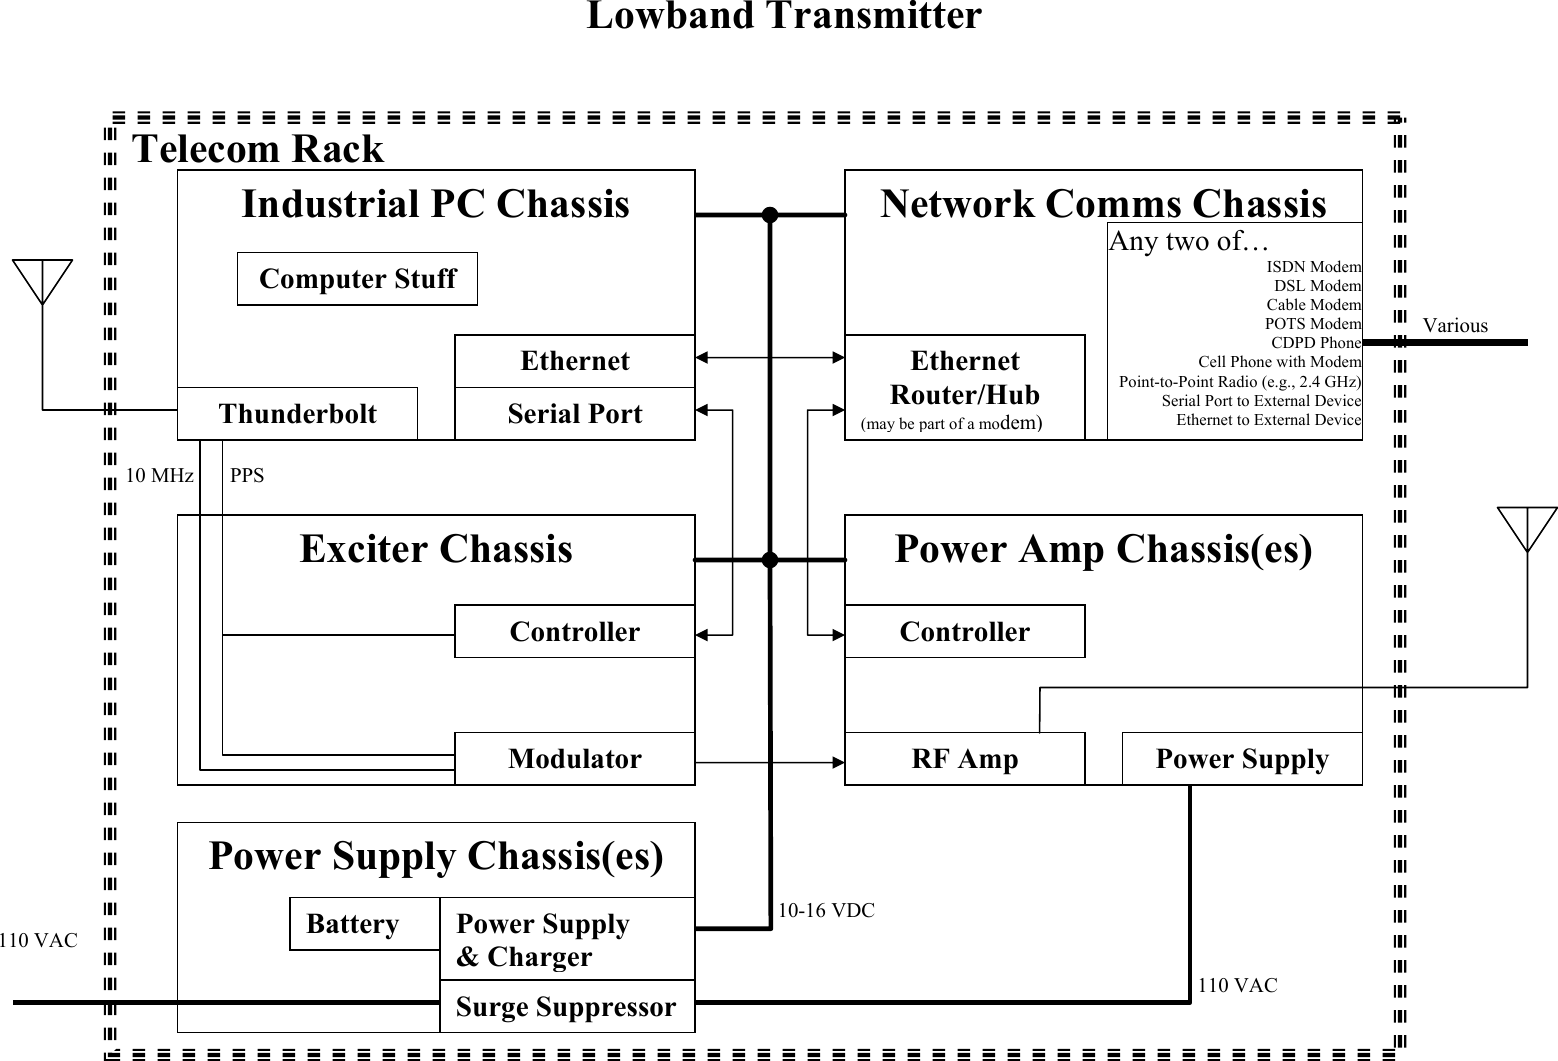 Lowband Transmitter Telecom Rack Network Comms Chassis Ethernet Router/Hub (may be part of a modem)Power Amp Chassis(es) RF Amp  Power Supply Controller Exciter Chassis Modulator Controller PPS 10 MHz Power Supply Chassis(es) Surge Suppressor Power Supply &amp; ChargerBattery 110 VAC 110 VAC 10-16 VDC Various Any two of… ISDN ModemDSL ModemCable ModemPOTS ModemCDPD PhoneCell Phone with ModemPoint-to-Point Radio (e.g., 2.4 GHz)Serial Port to External DeviceEthernet to External DeviceIndustrial PC Chassis Thunderbolt  Serial Port Ethernet Computer Stuff 